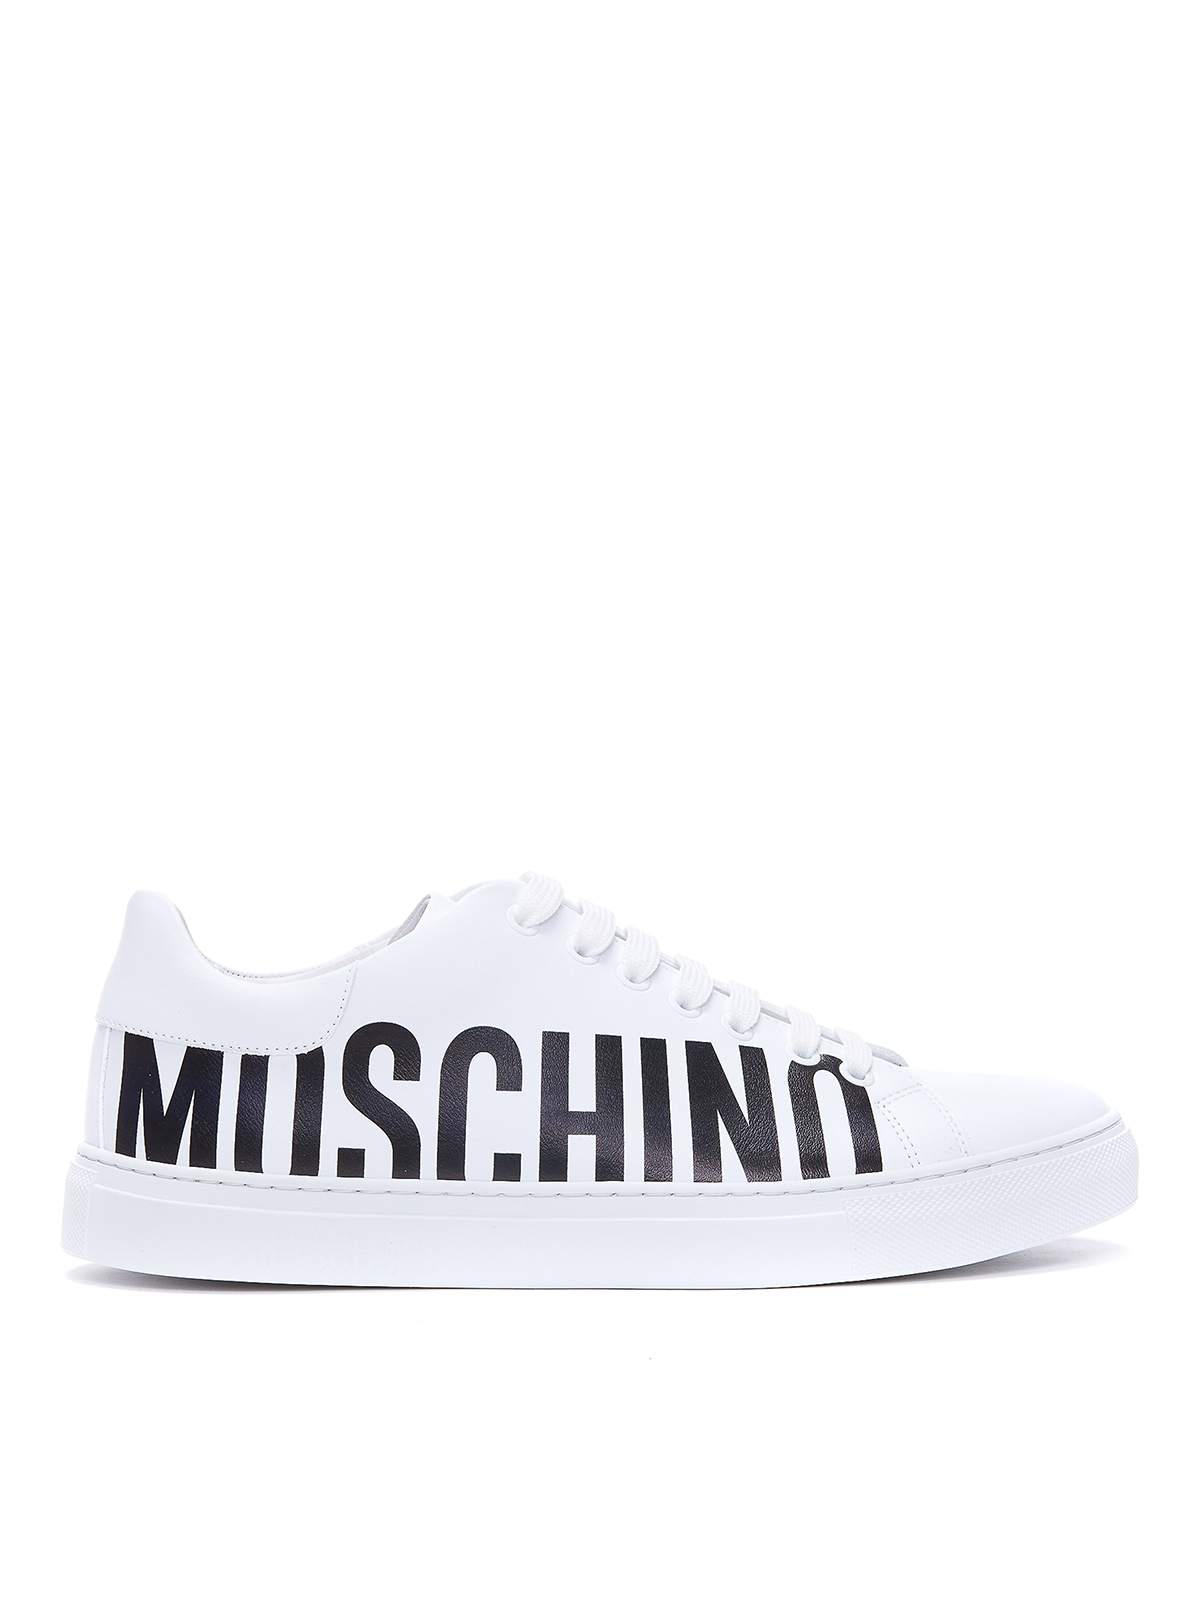 Moschino Leather Trainers In White